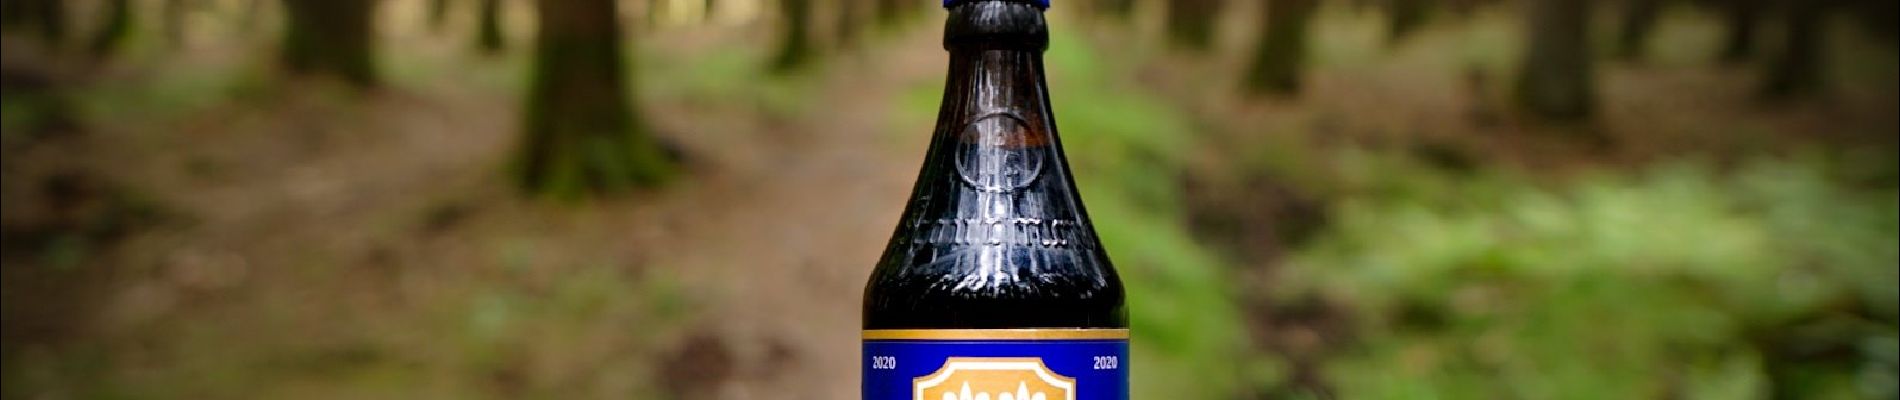 Tocht Stappen Chimay - Rando bière : Chimay  - Photo